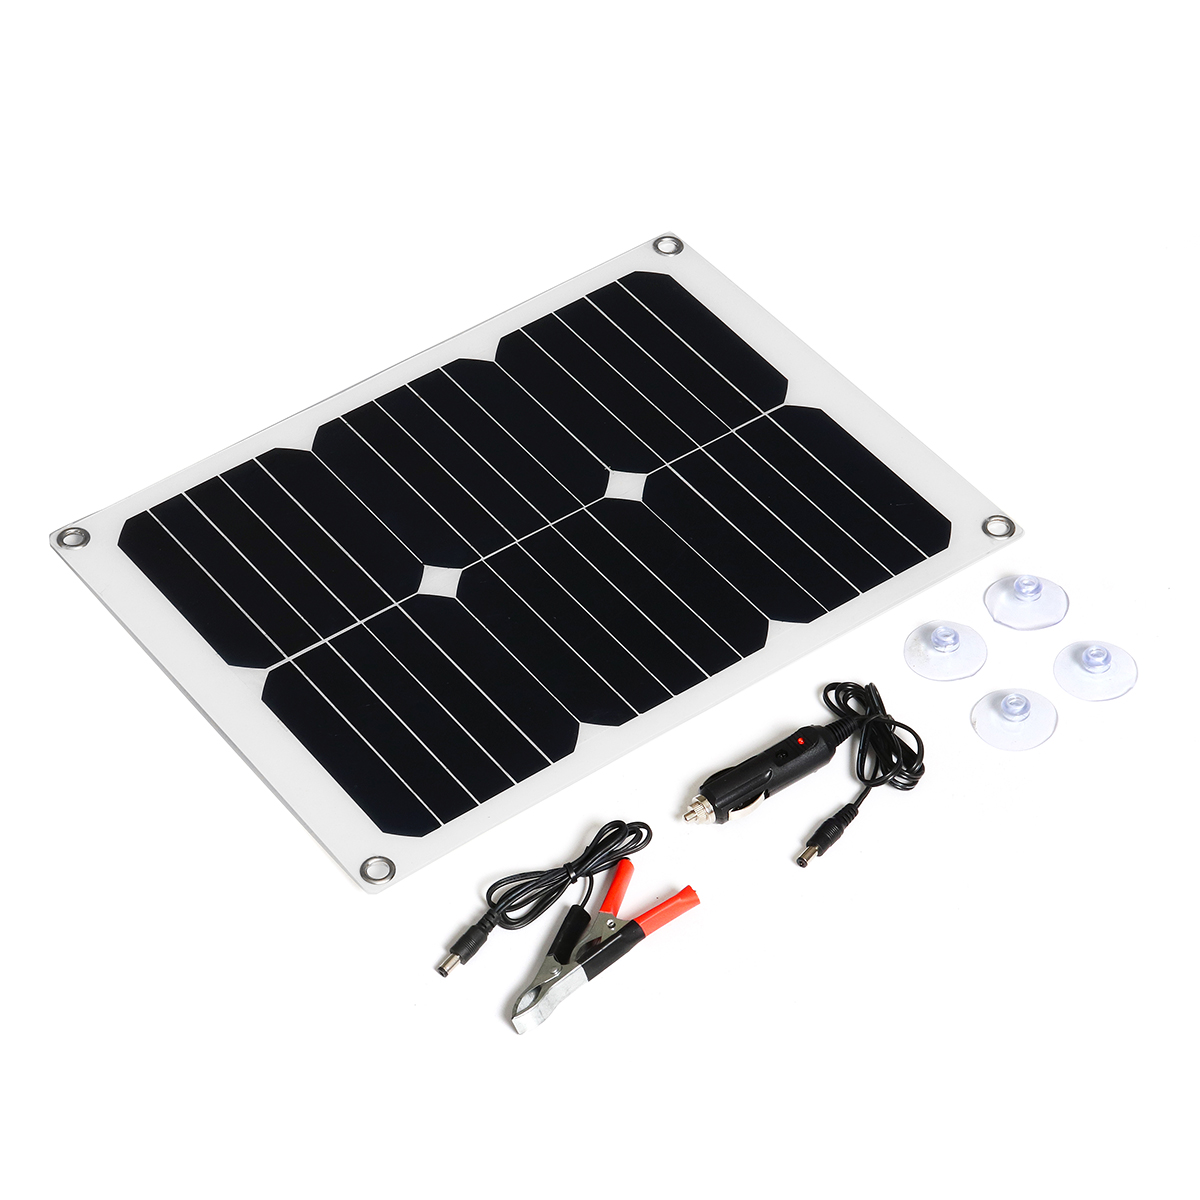 

15W Monocrystalline Solar Panel Dual USB Output Solar Powered Panel With Charger Battery clip